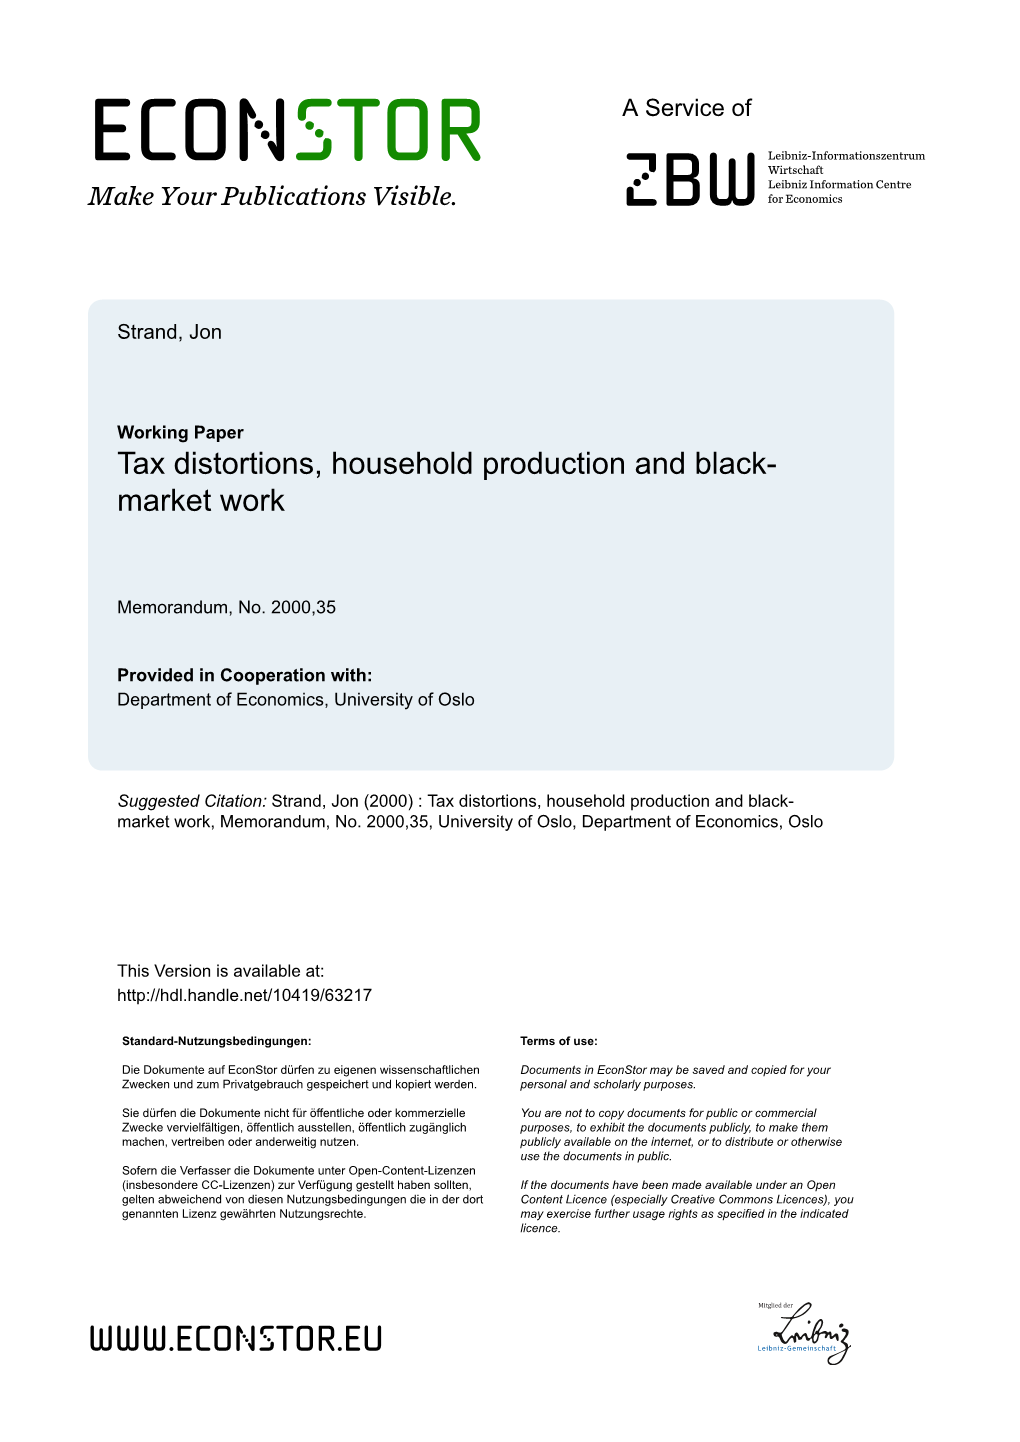 Tax Distortions, Household Production and Black-Market Work